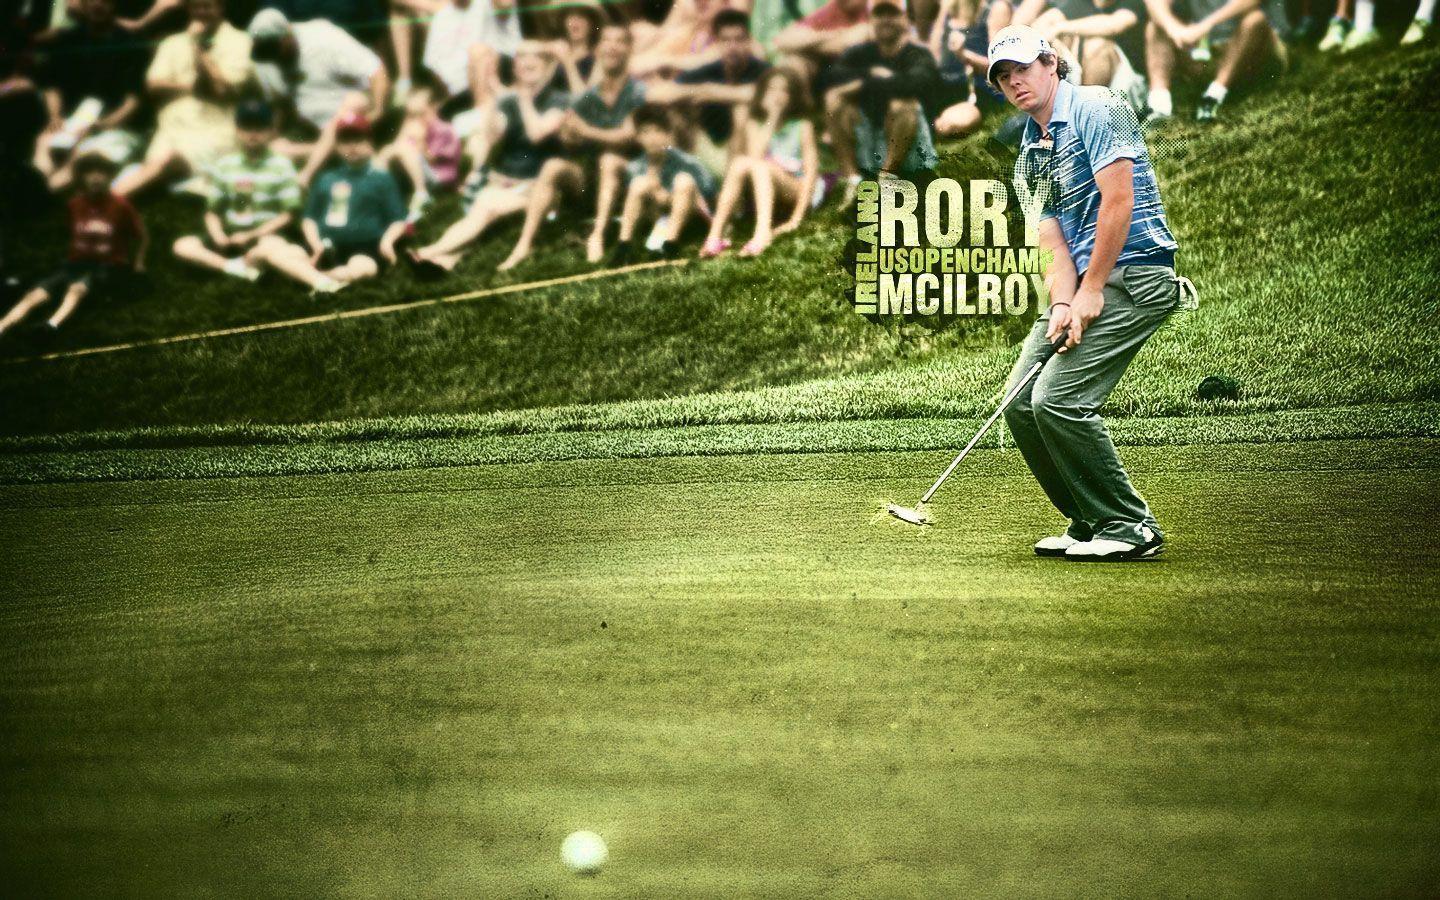 rory mcilroy Wallpaper and Background Imagex900